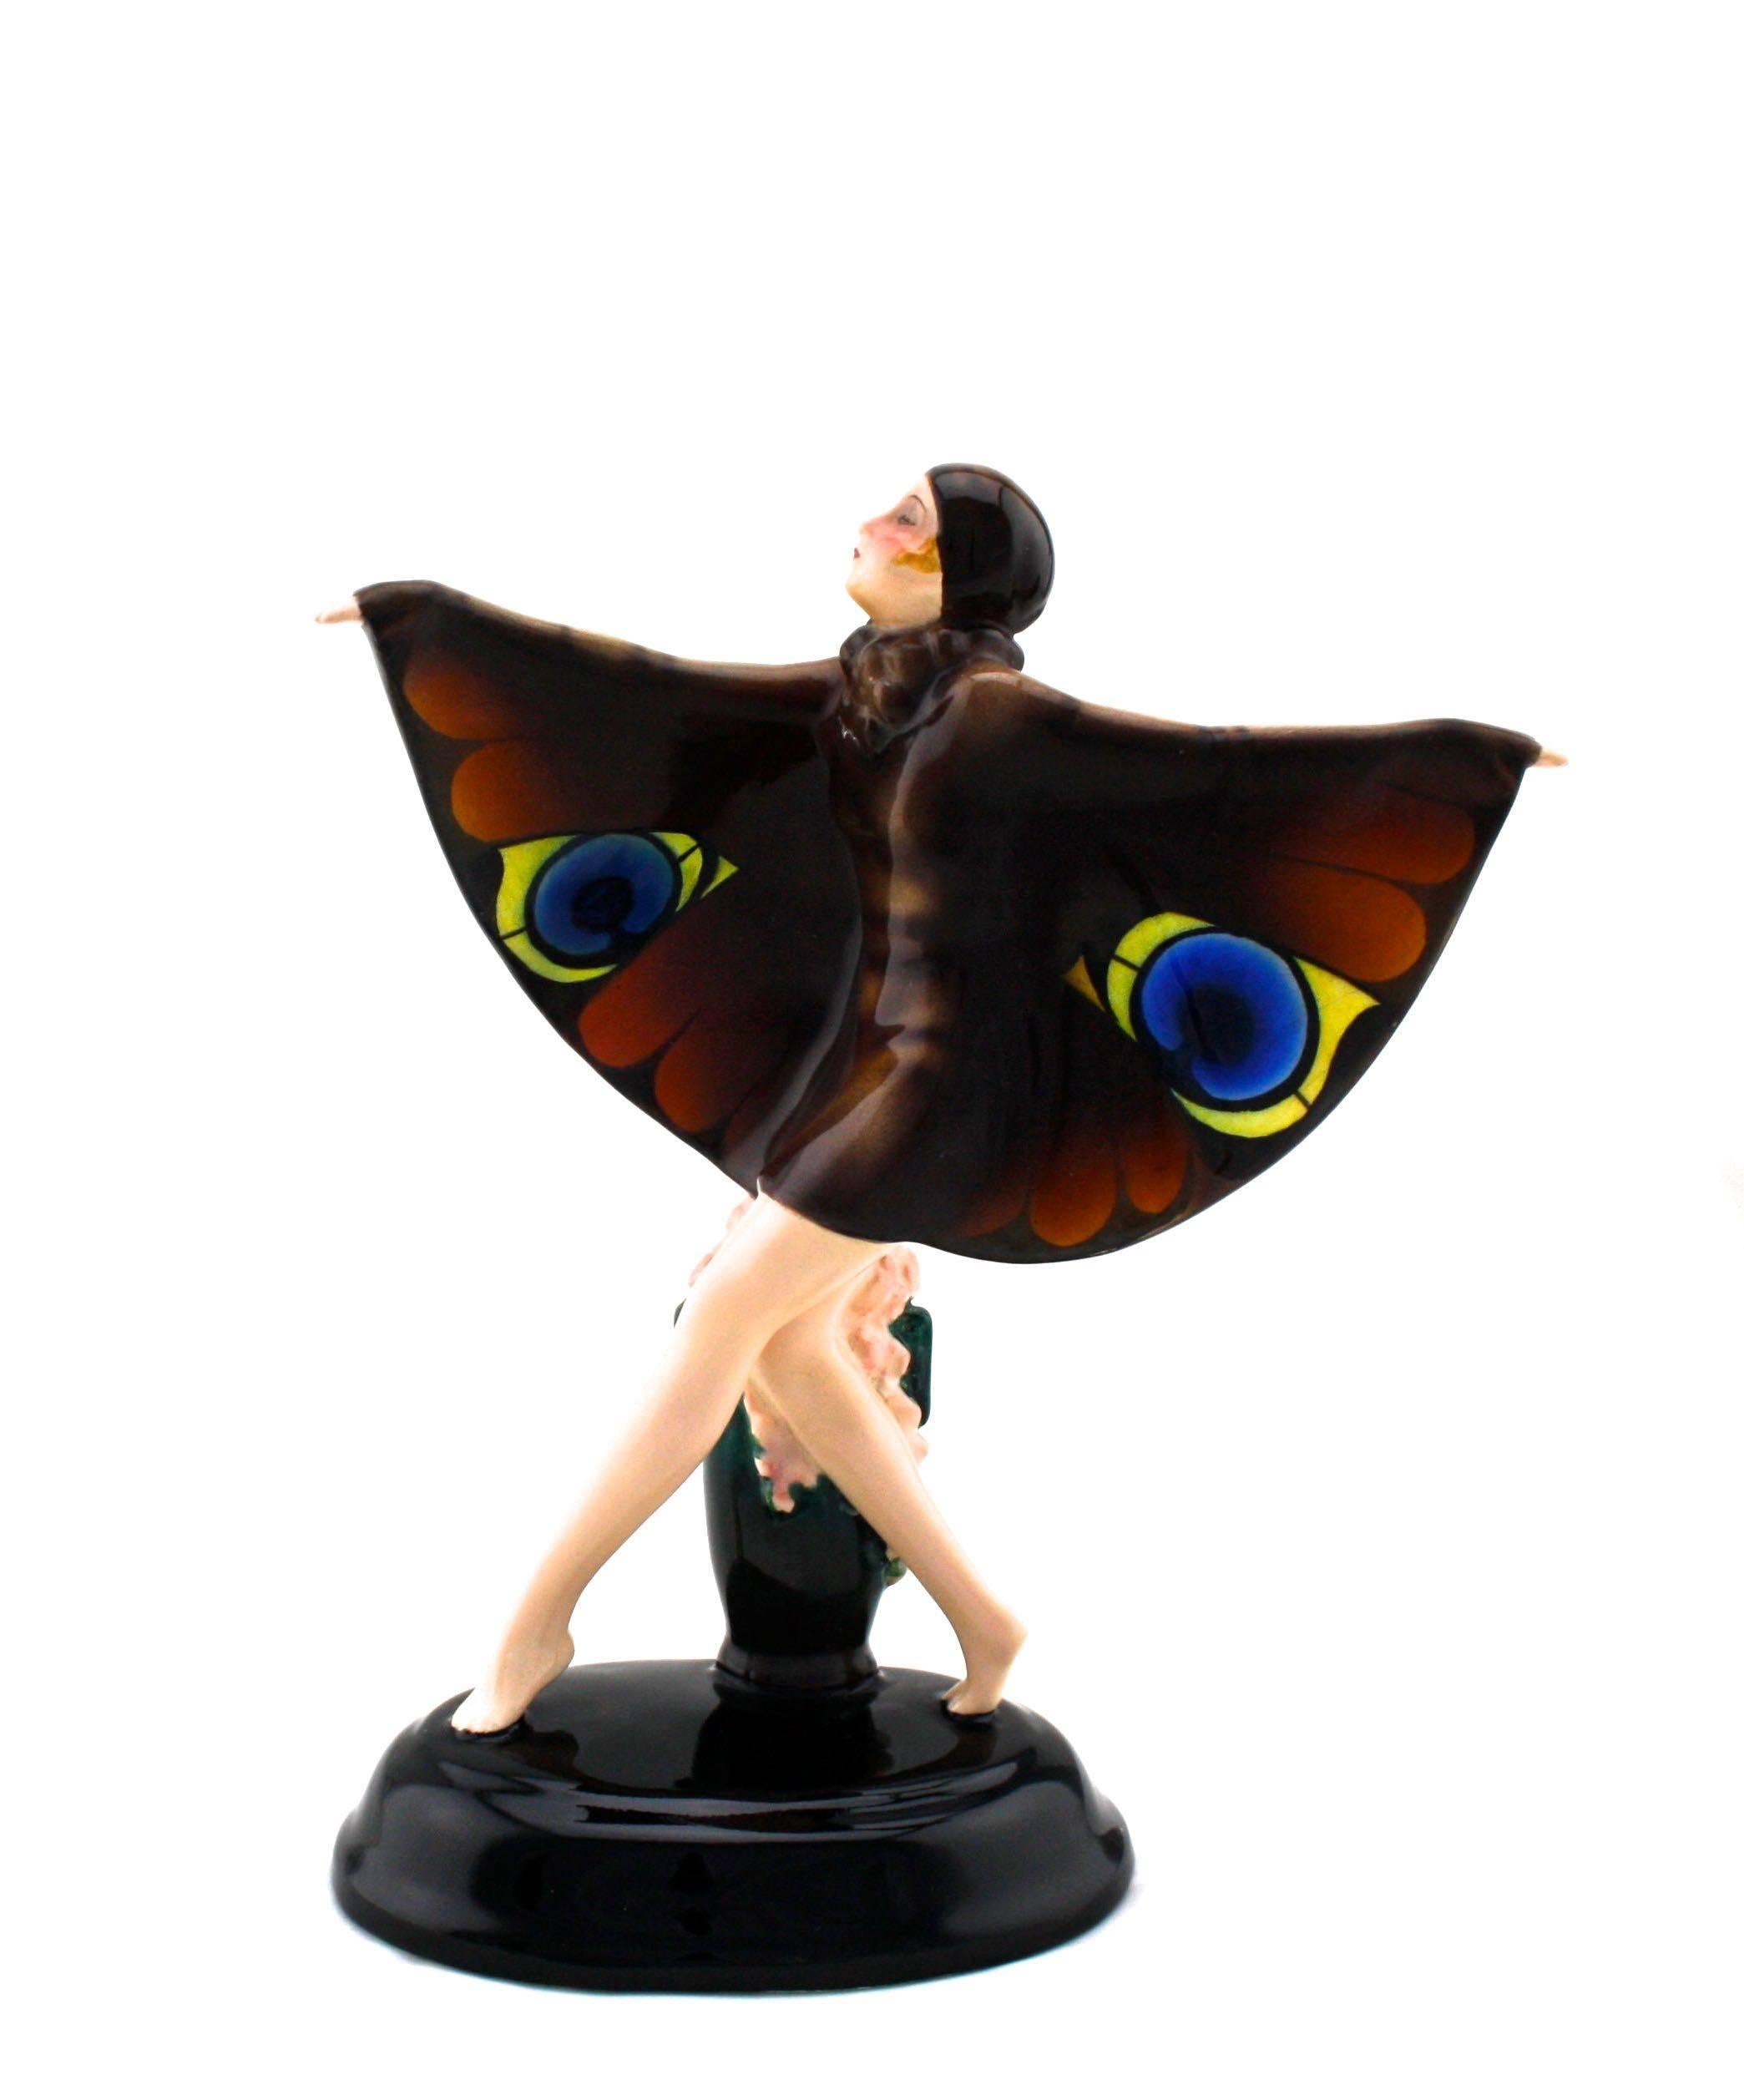 This little beauty is the smaller model and by far the rarest size and color version. Dressed to the nines in her butterfly cape.
She present is beautiful undamaged condition and would be the highlife of any serious Art Deco collection.
Crisp